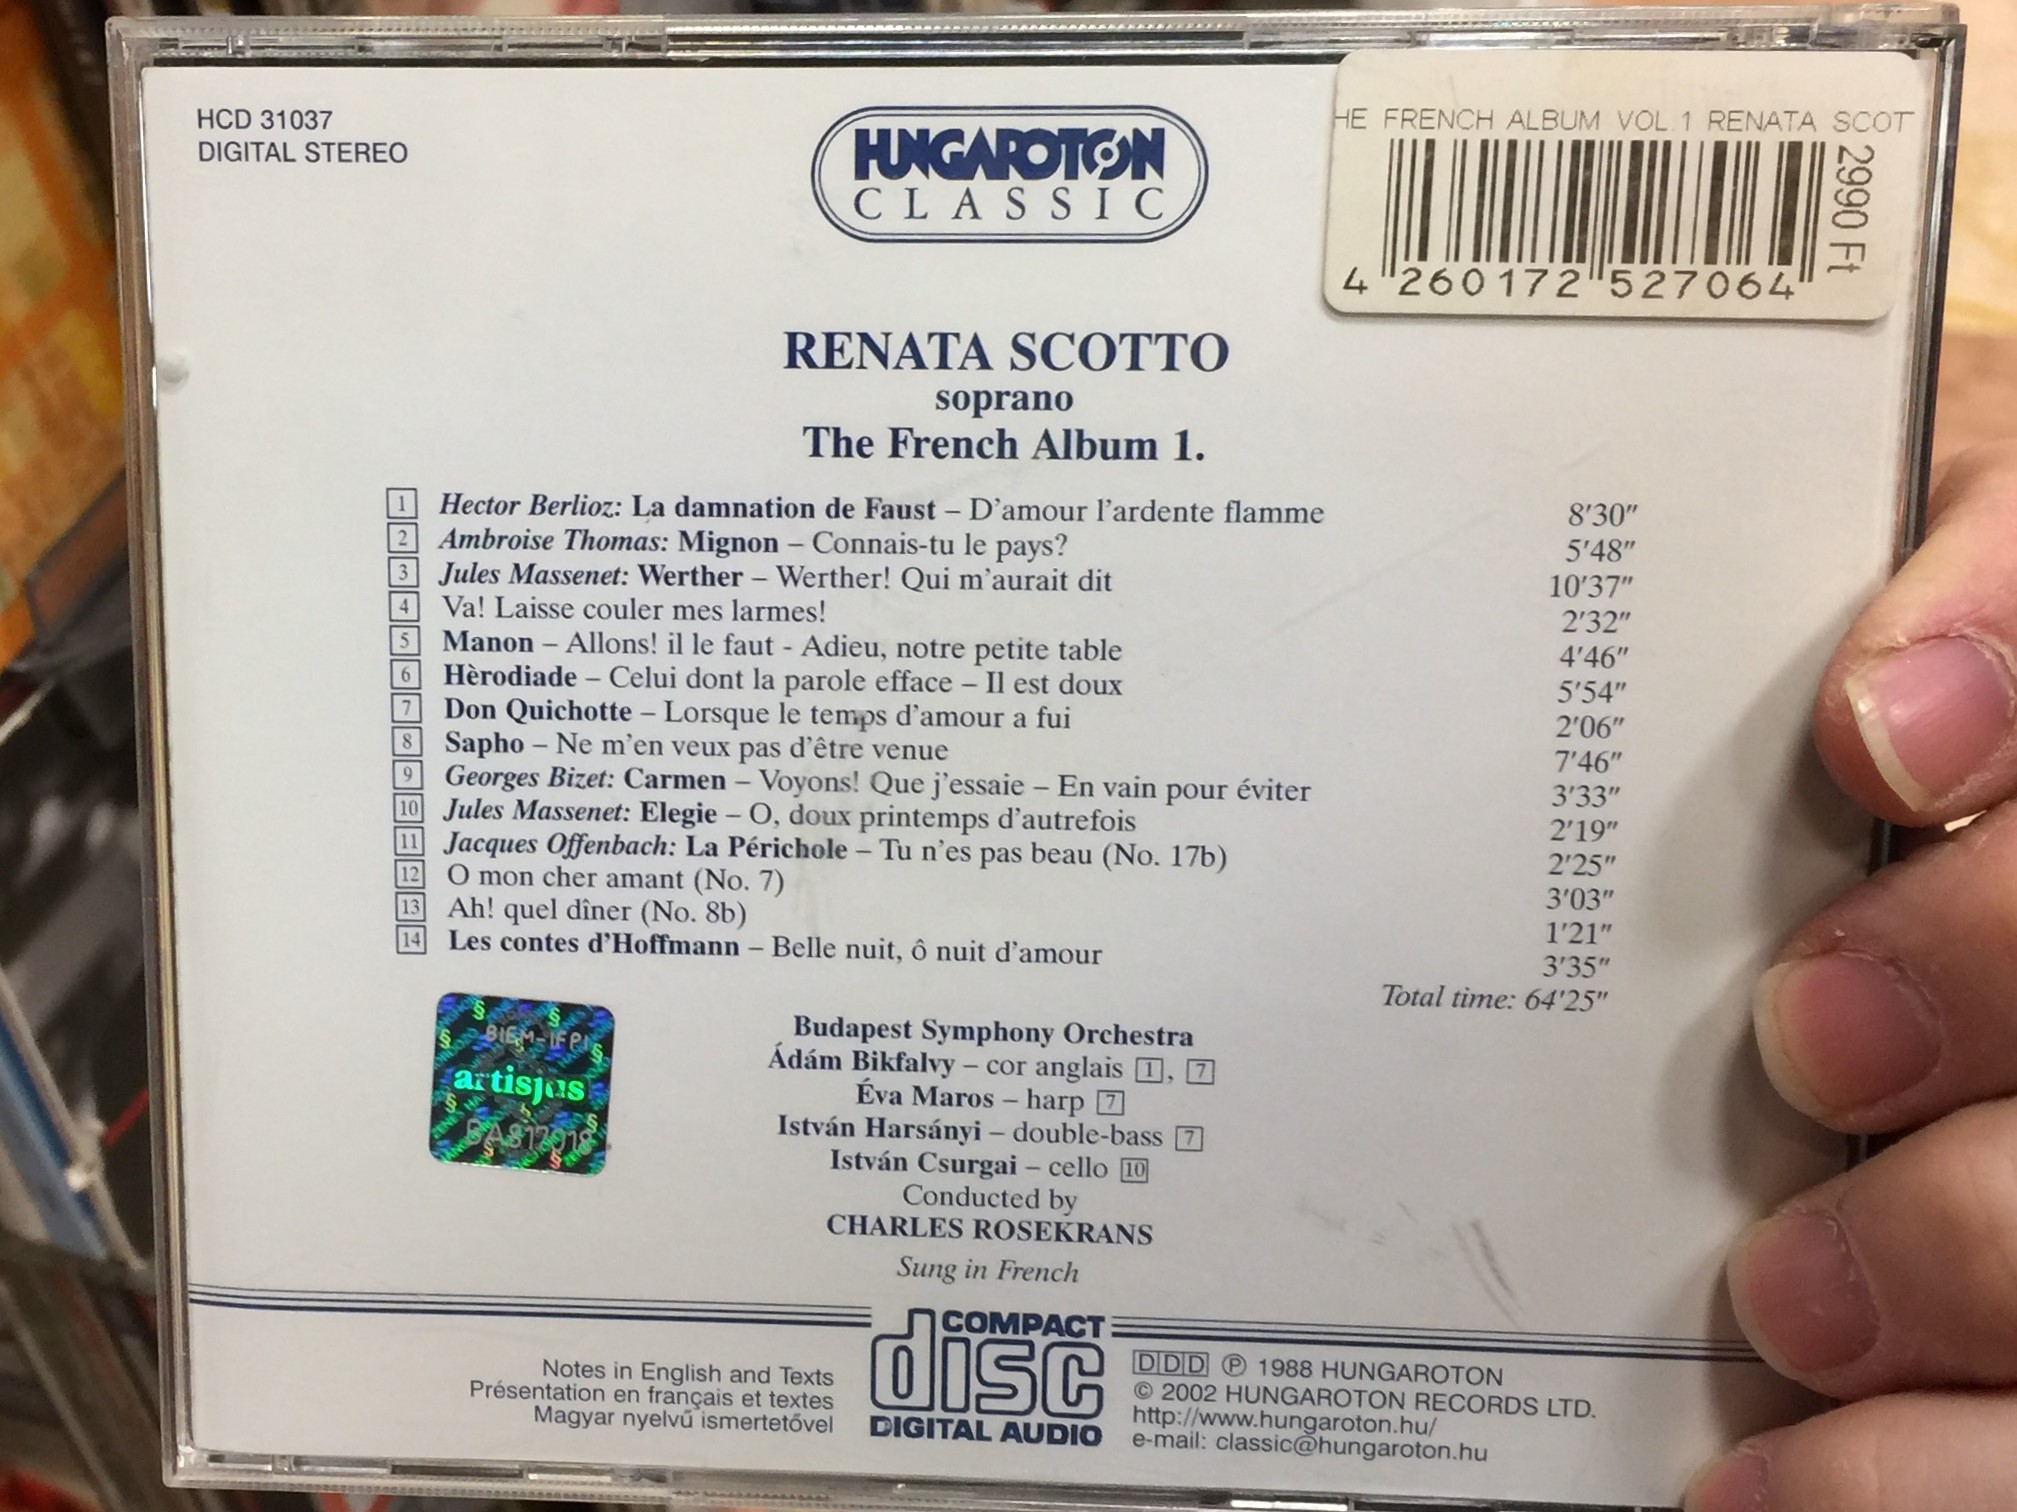 renata-scotto-the-french-album-1-berlioz-thomas-massenet-bizet-offenbach-budapest-symphony-orchestra-conducted-by-charles-rosekrans-hungaroton-classic-audio-cd-1988-stereo-hcd-31037-.jpg